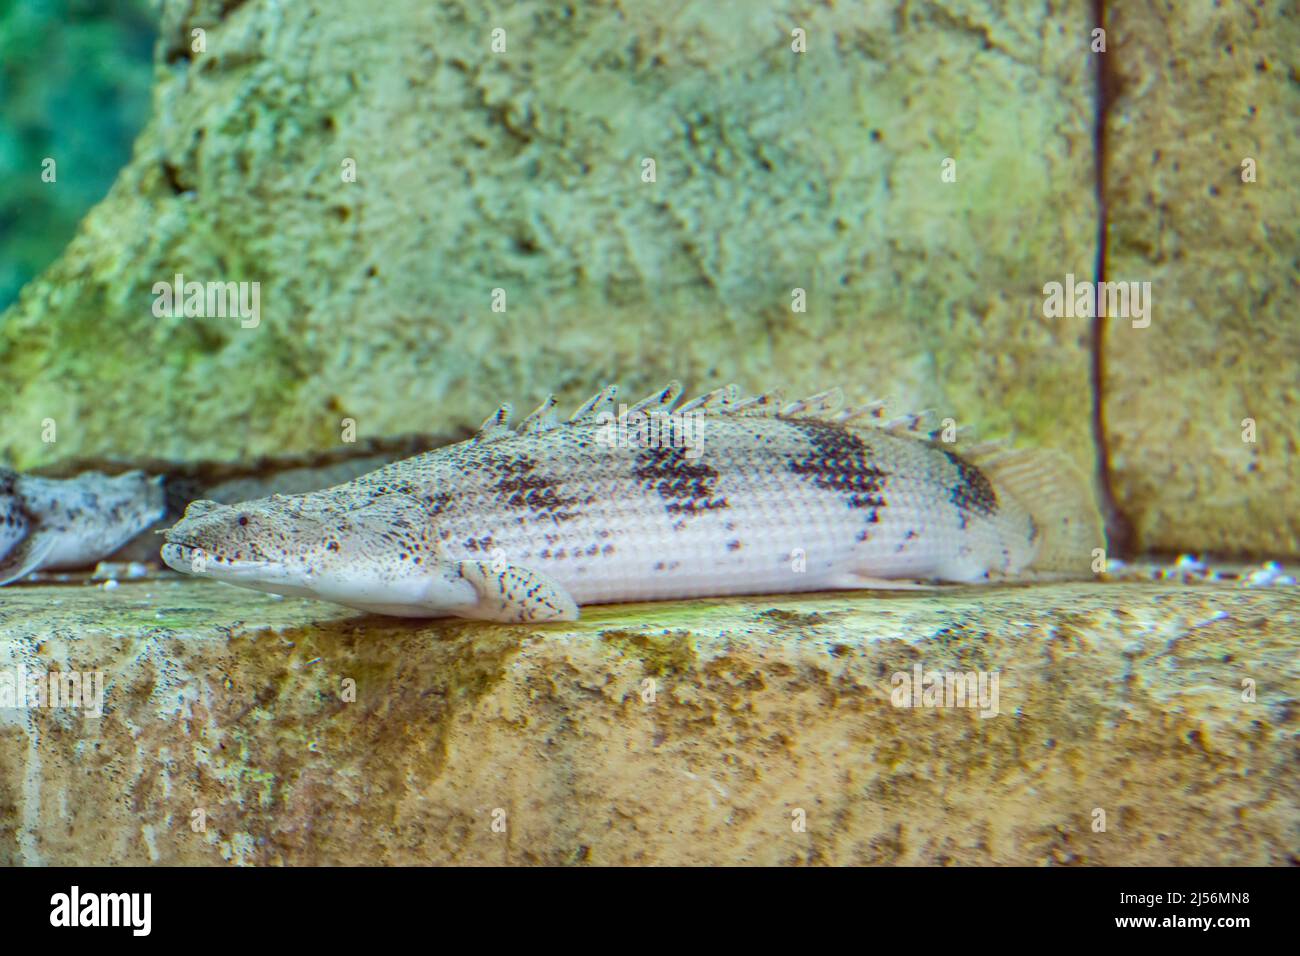 The saddled bichir (Polypterus endlicheri). The body is long and about as deep as it is wide. A serrated dorsal fin runs along most of the body. Stock Photo